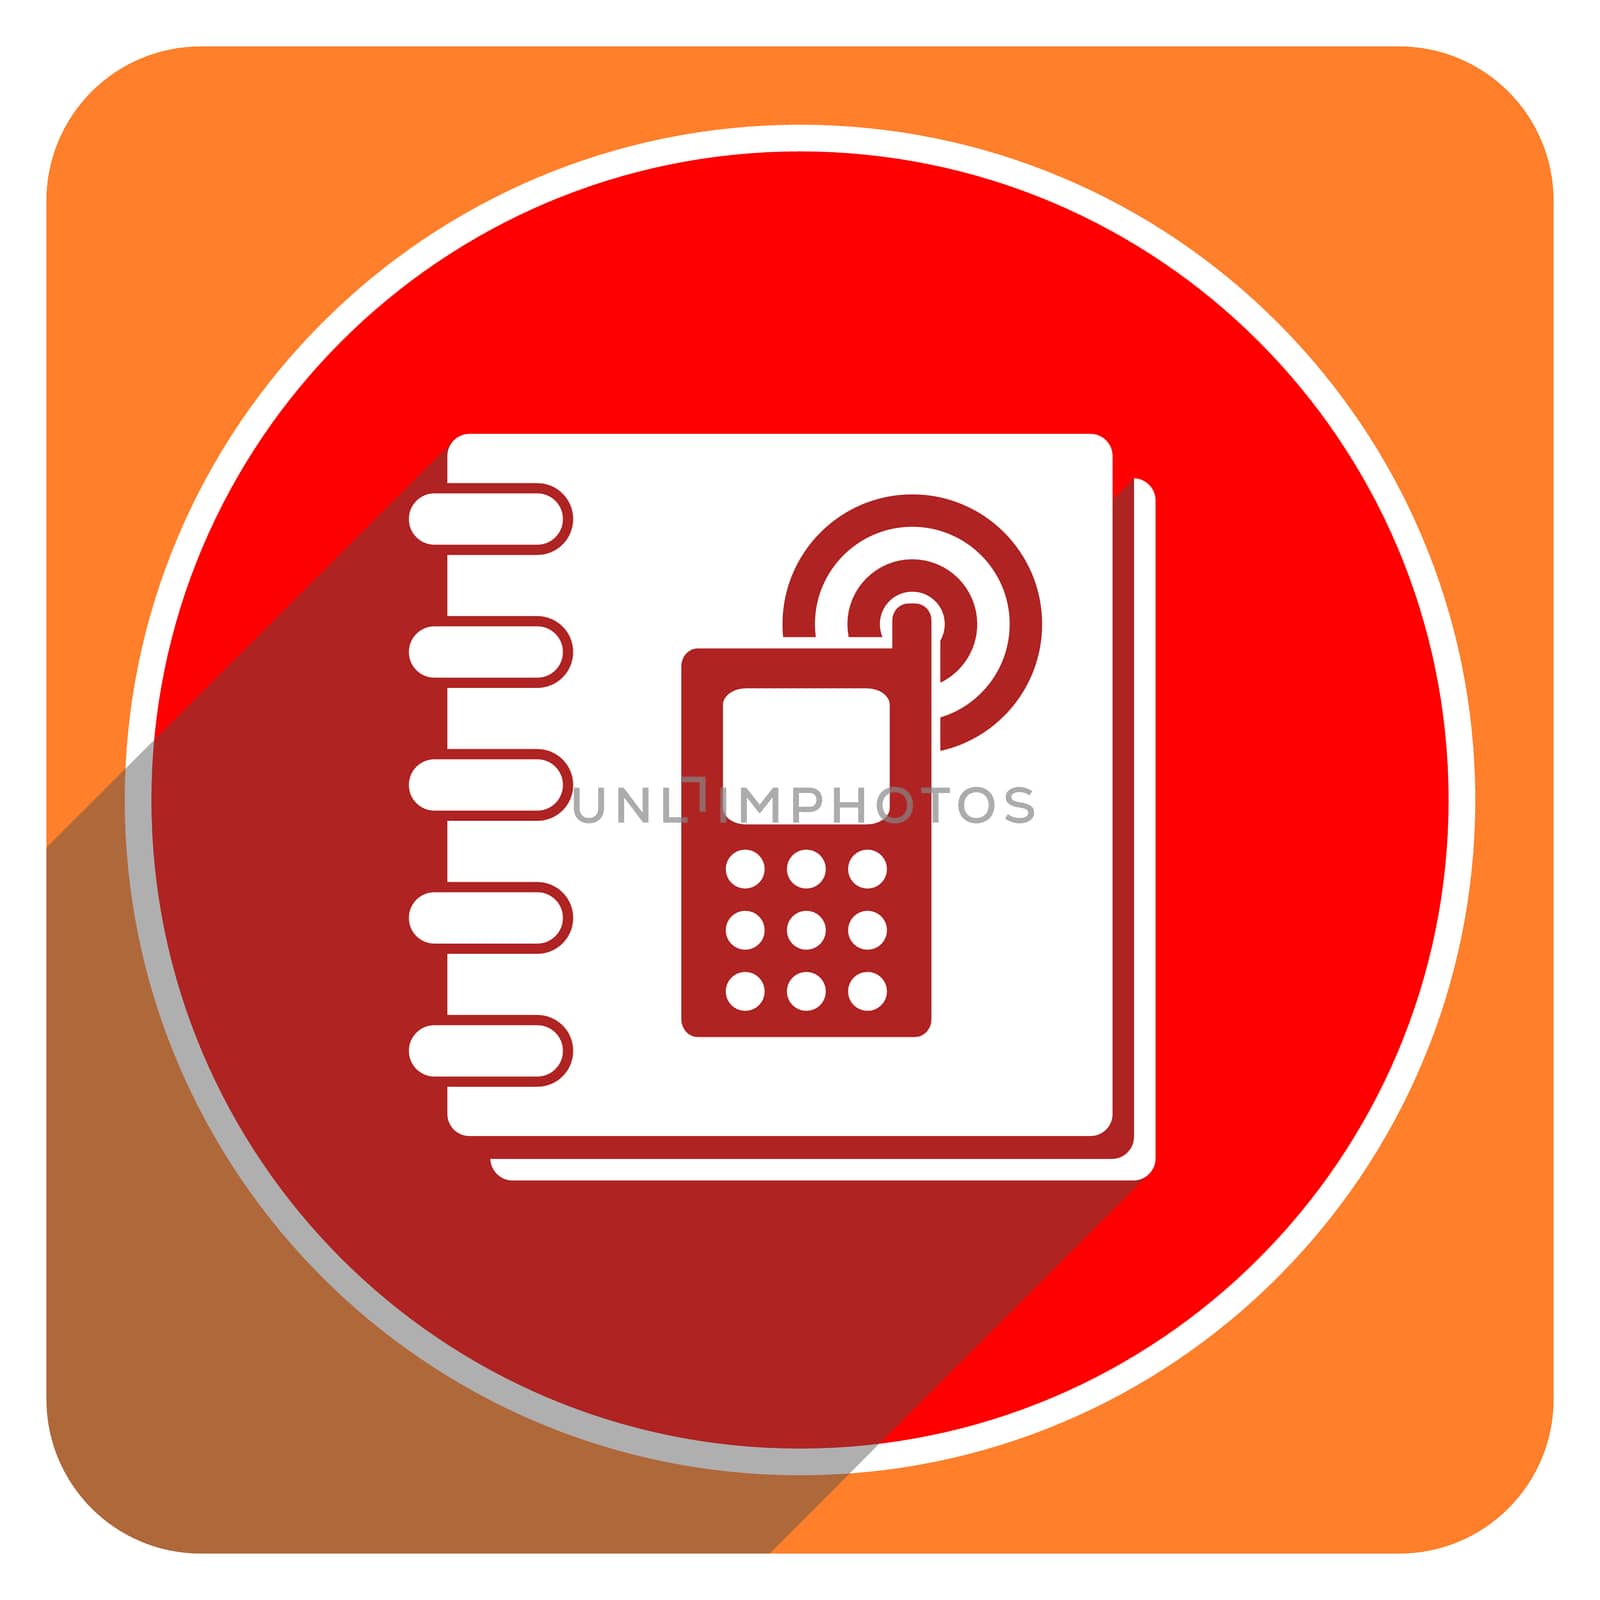 phonebook red flat icon isolated